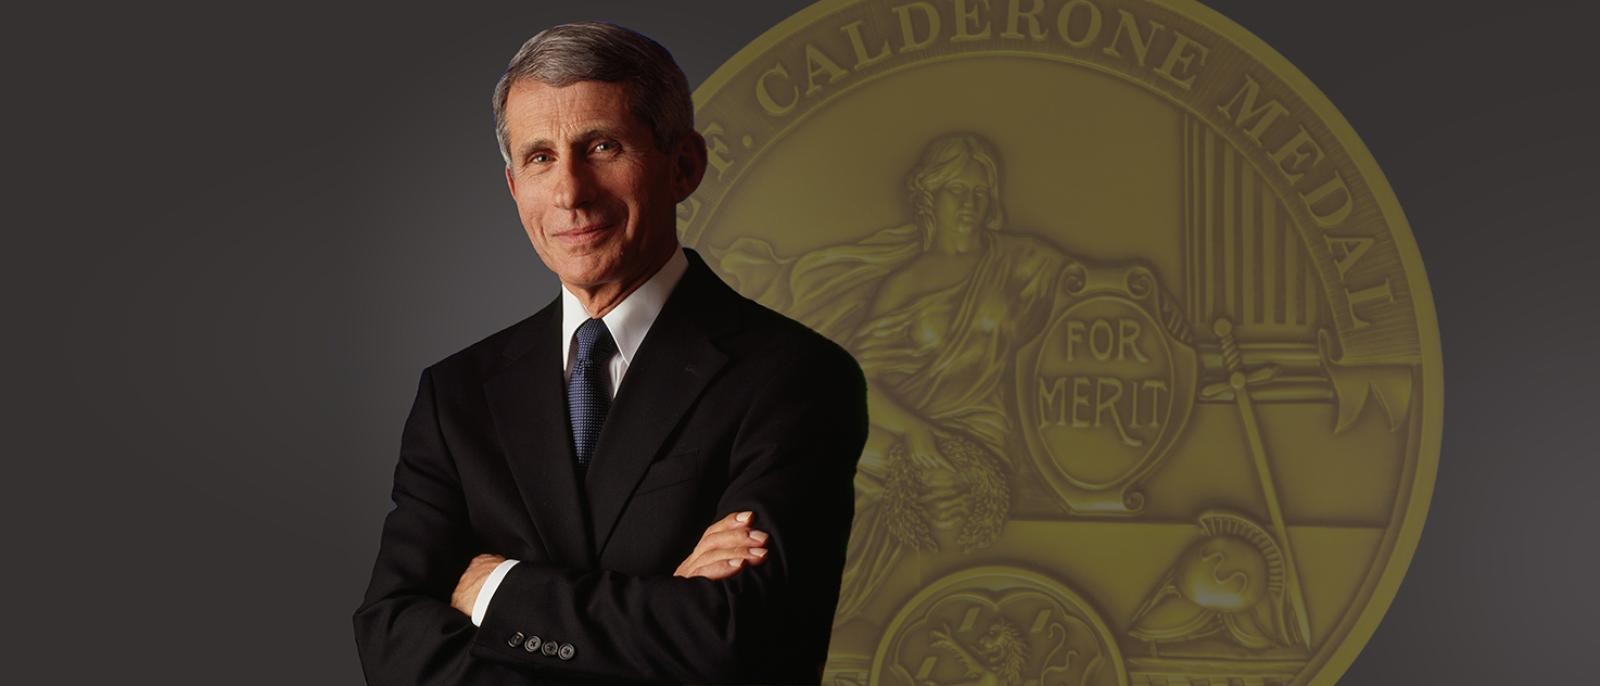 Dr. Anthony Fauci to Receive the Frank A. Calderone Prize in Public Health at Columbia Mailman School Award Ceremony